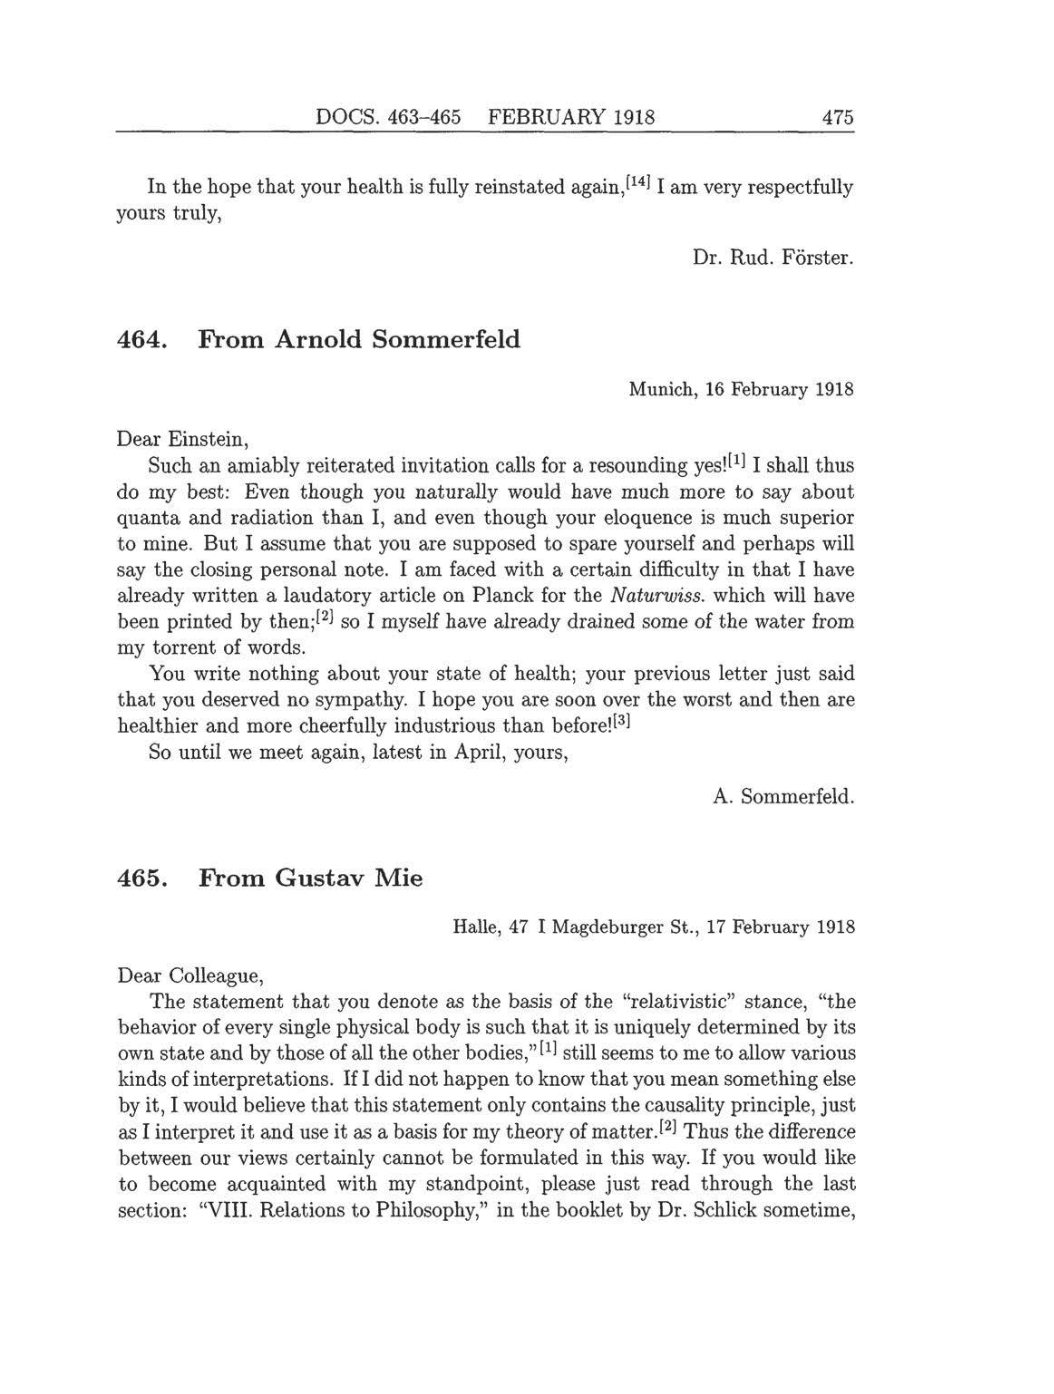 Volume 8: The Berlin Years: Correspondence, 1914-1918 (English translation supplement) page 475